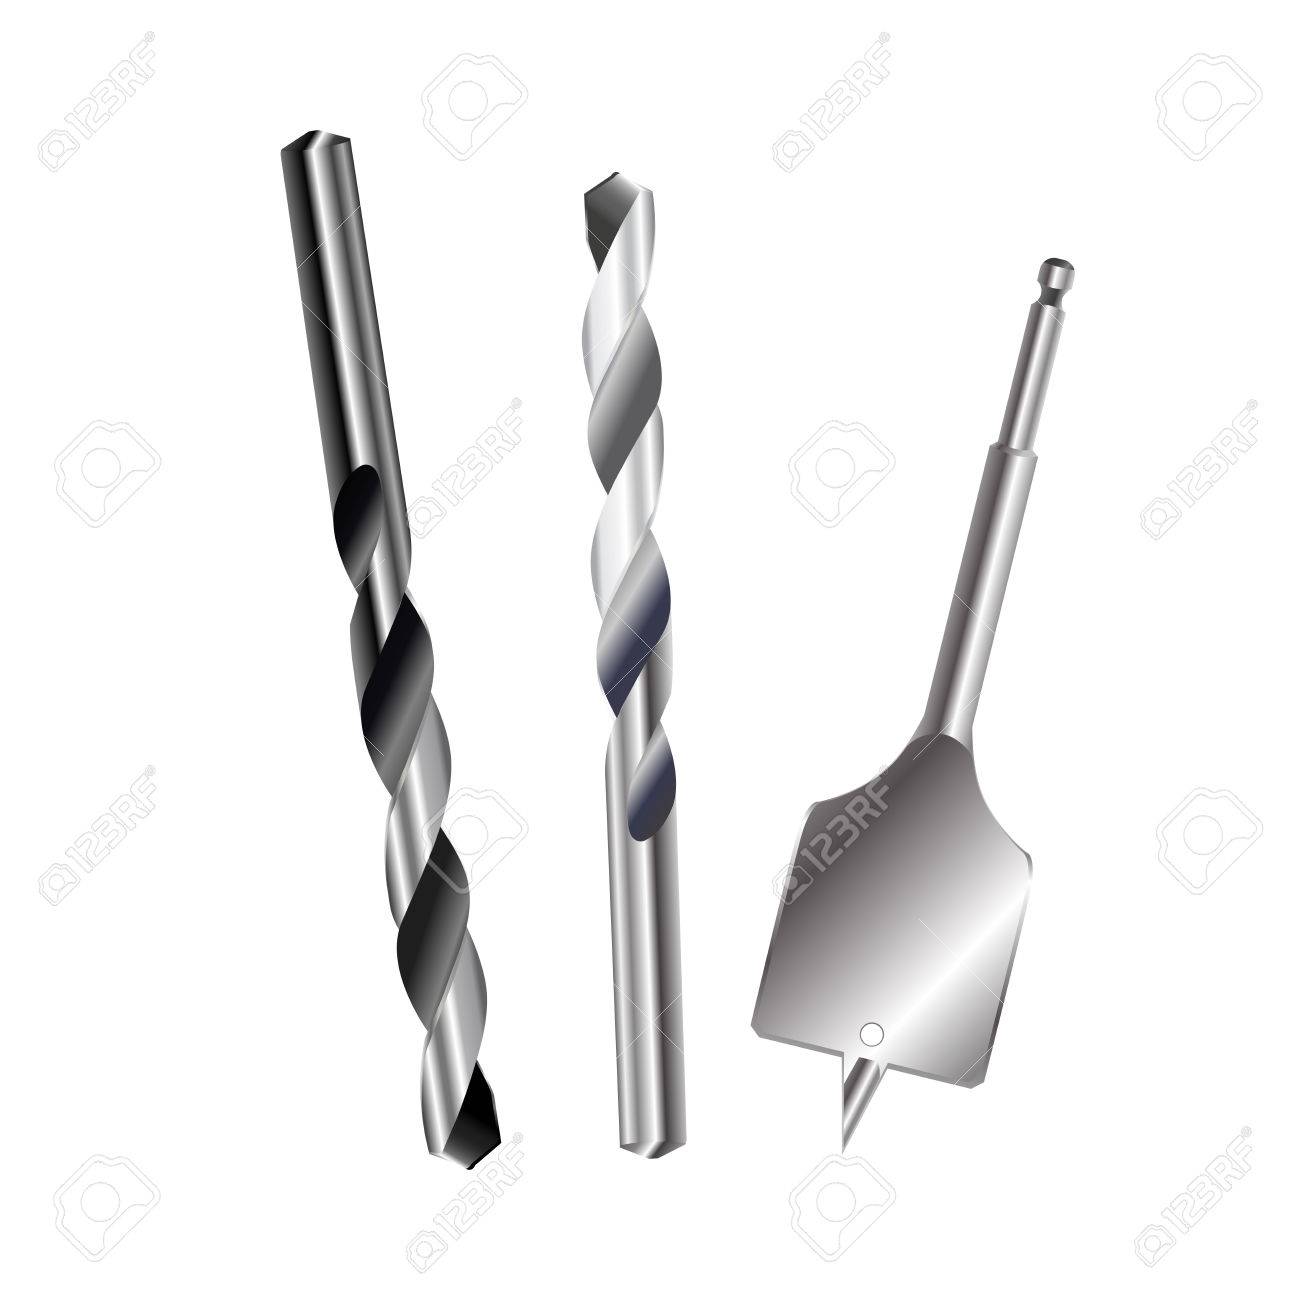 Drill Bit Metal Set Isolated On White Background Vector